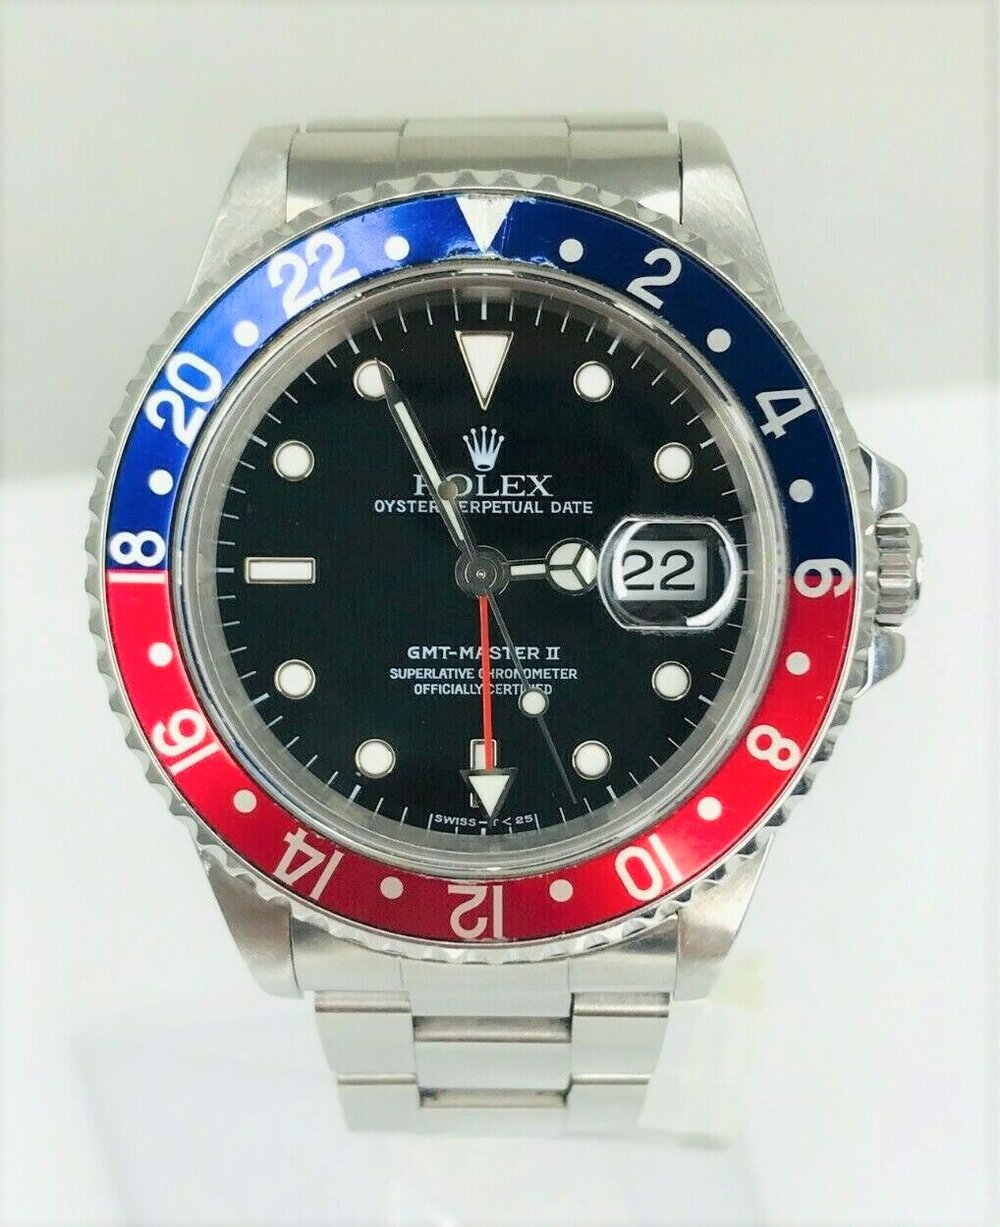 Rolex Oyster Perpetual Date GMT-Master II 